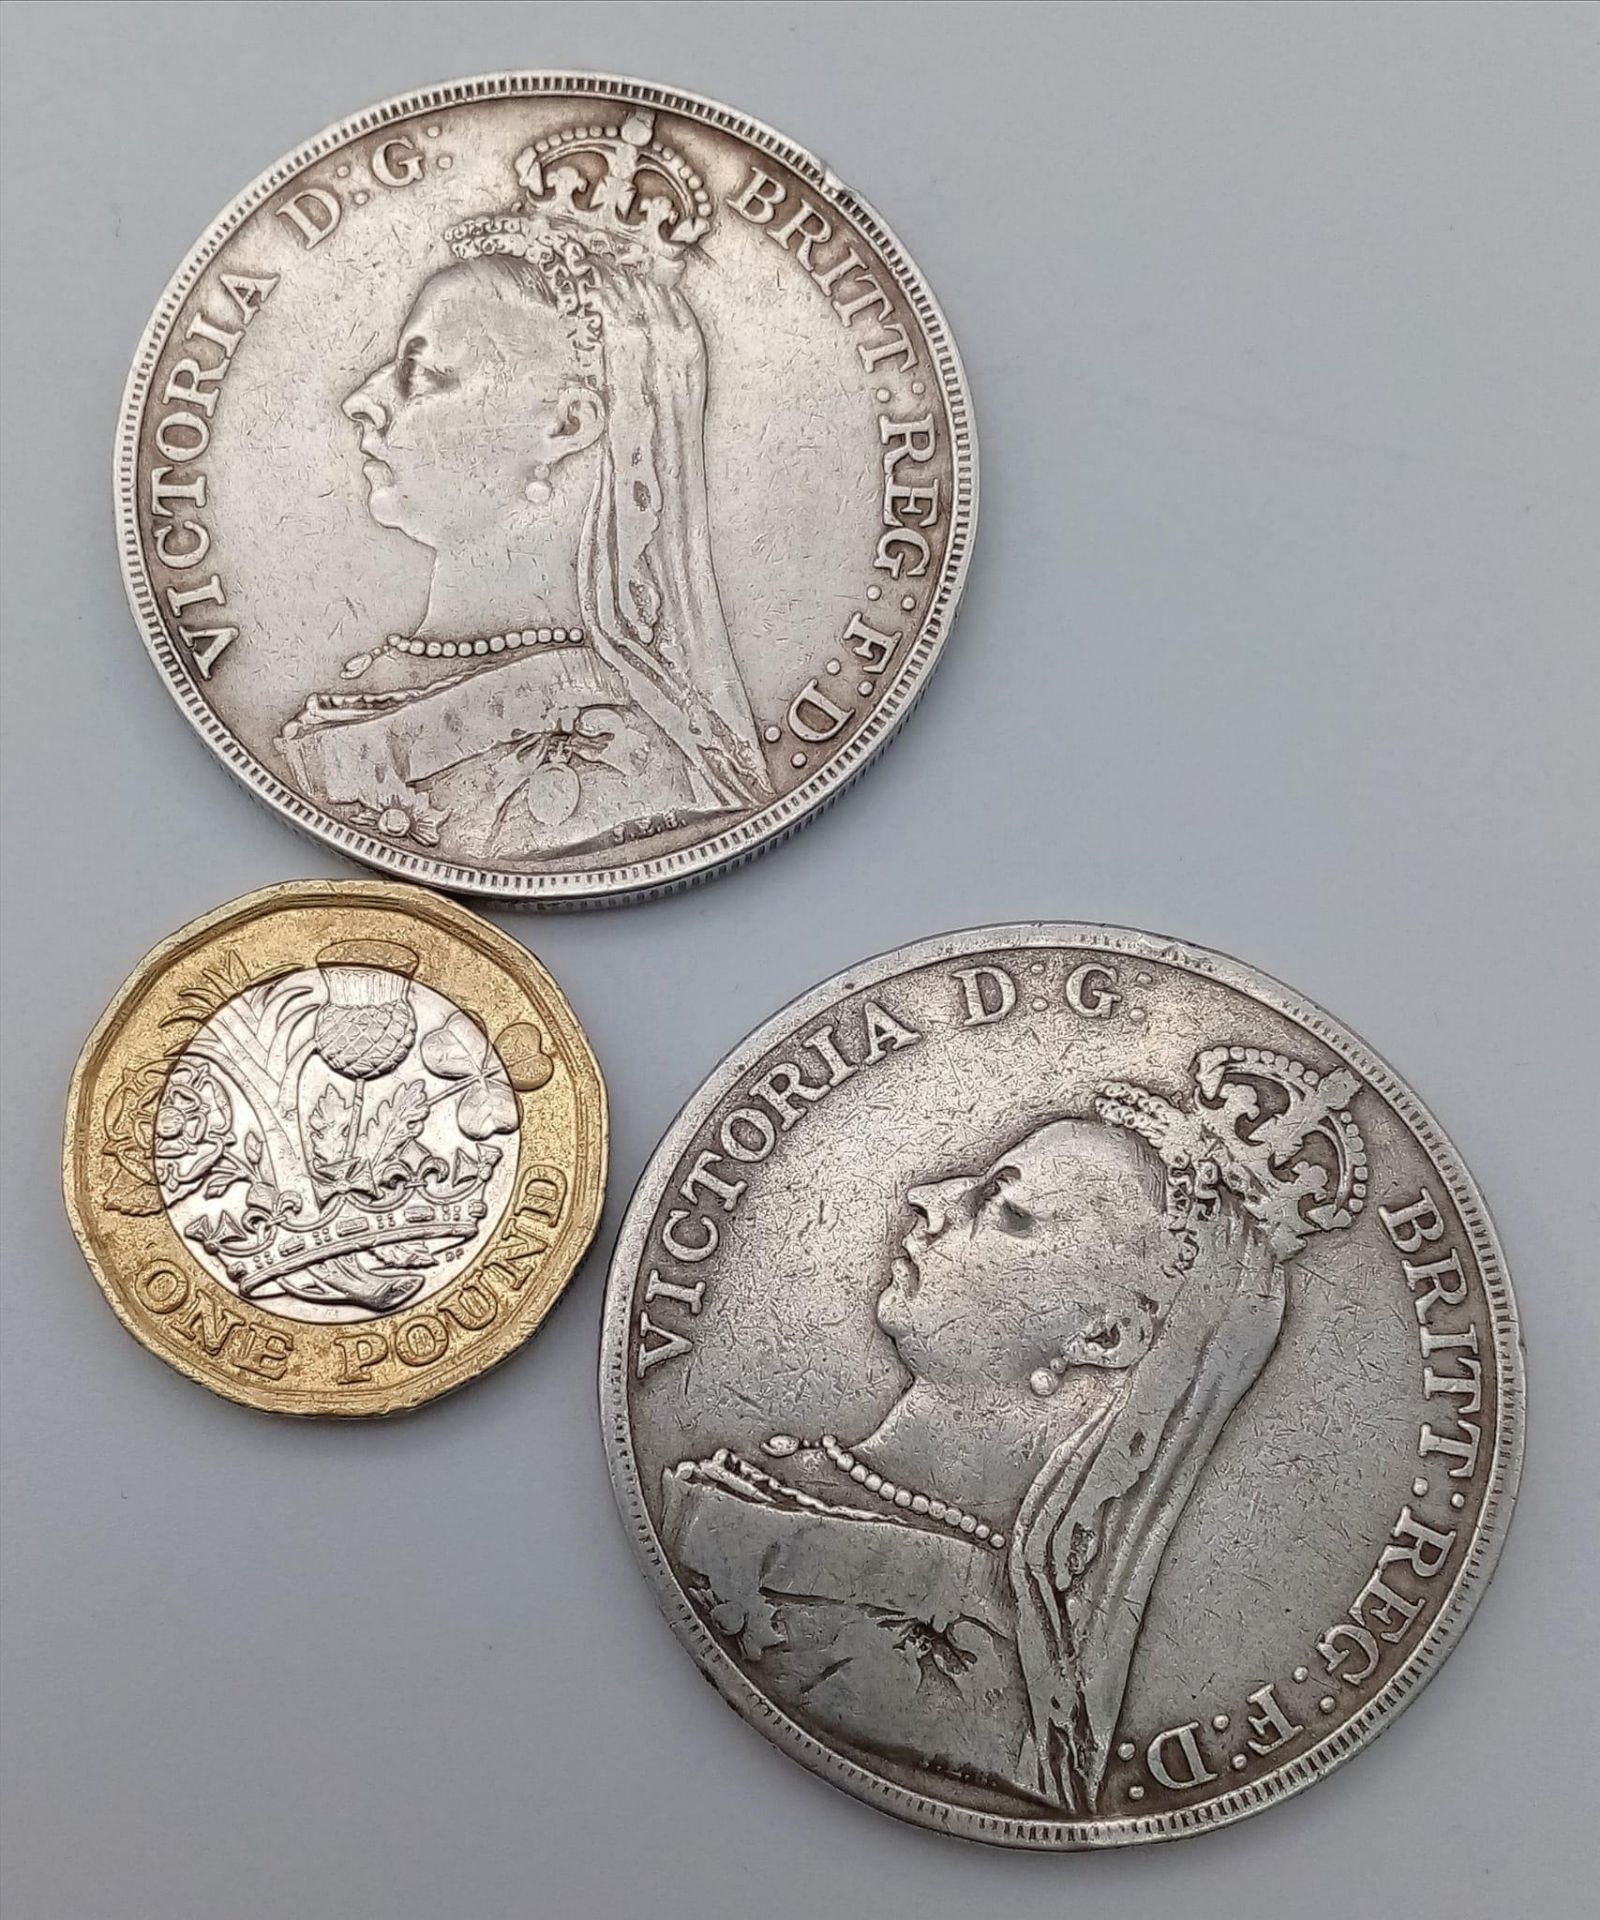 Two Queen Victoria Silver Halfcrown Coins 1890 and 1891. Please see photos for conditions. - Image 2 of 2